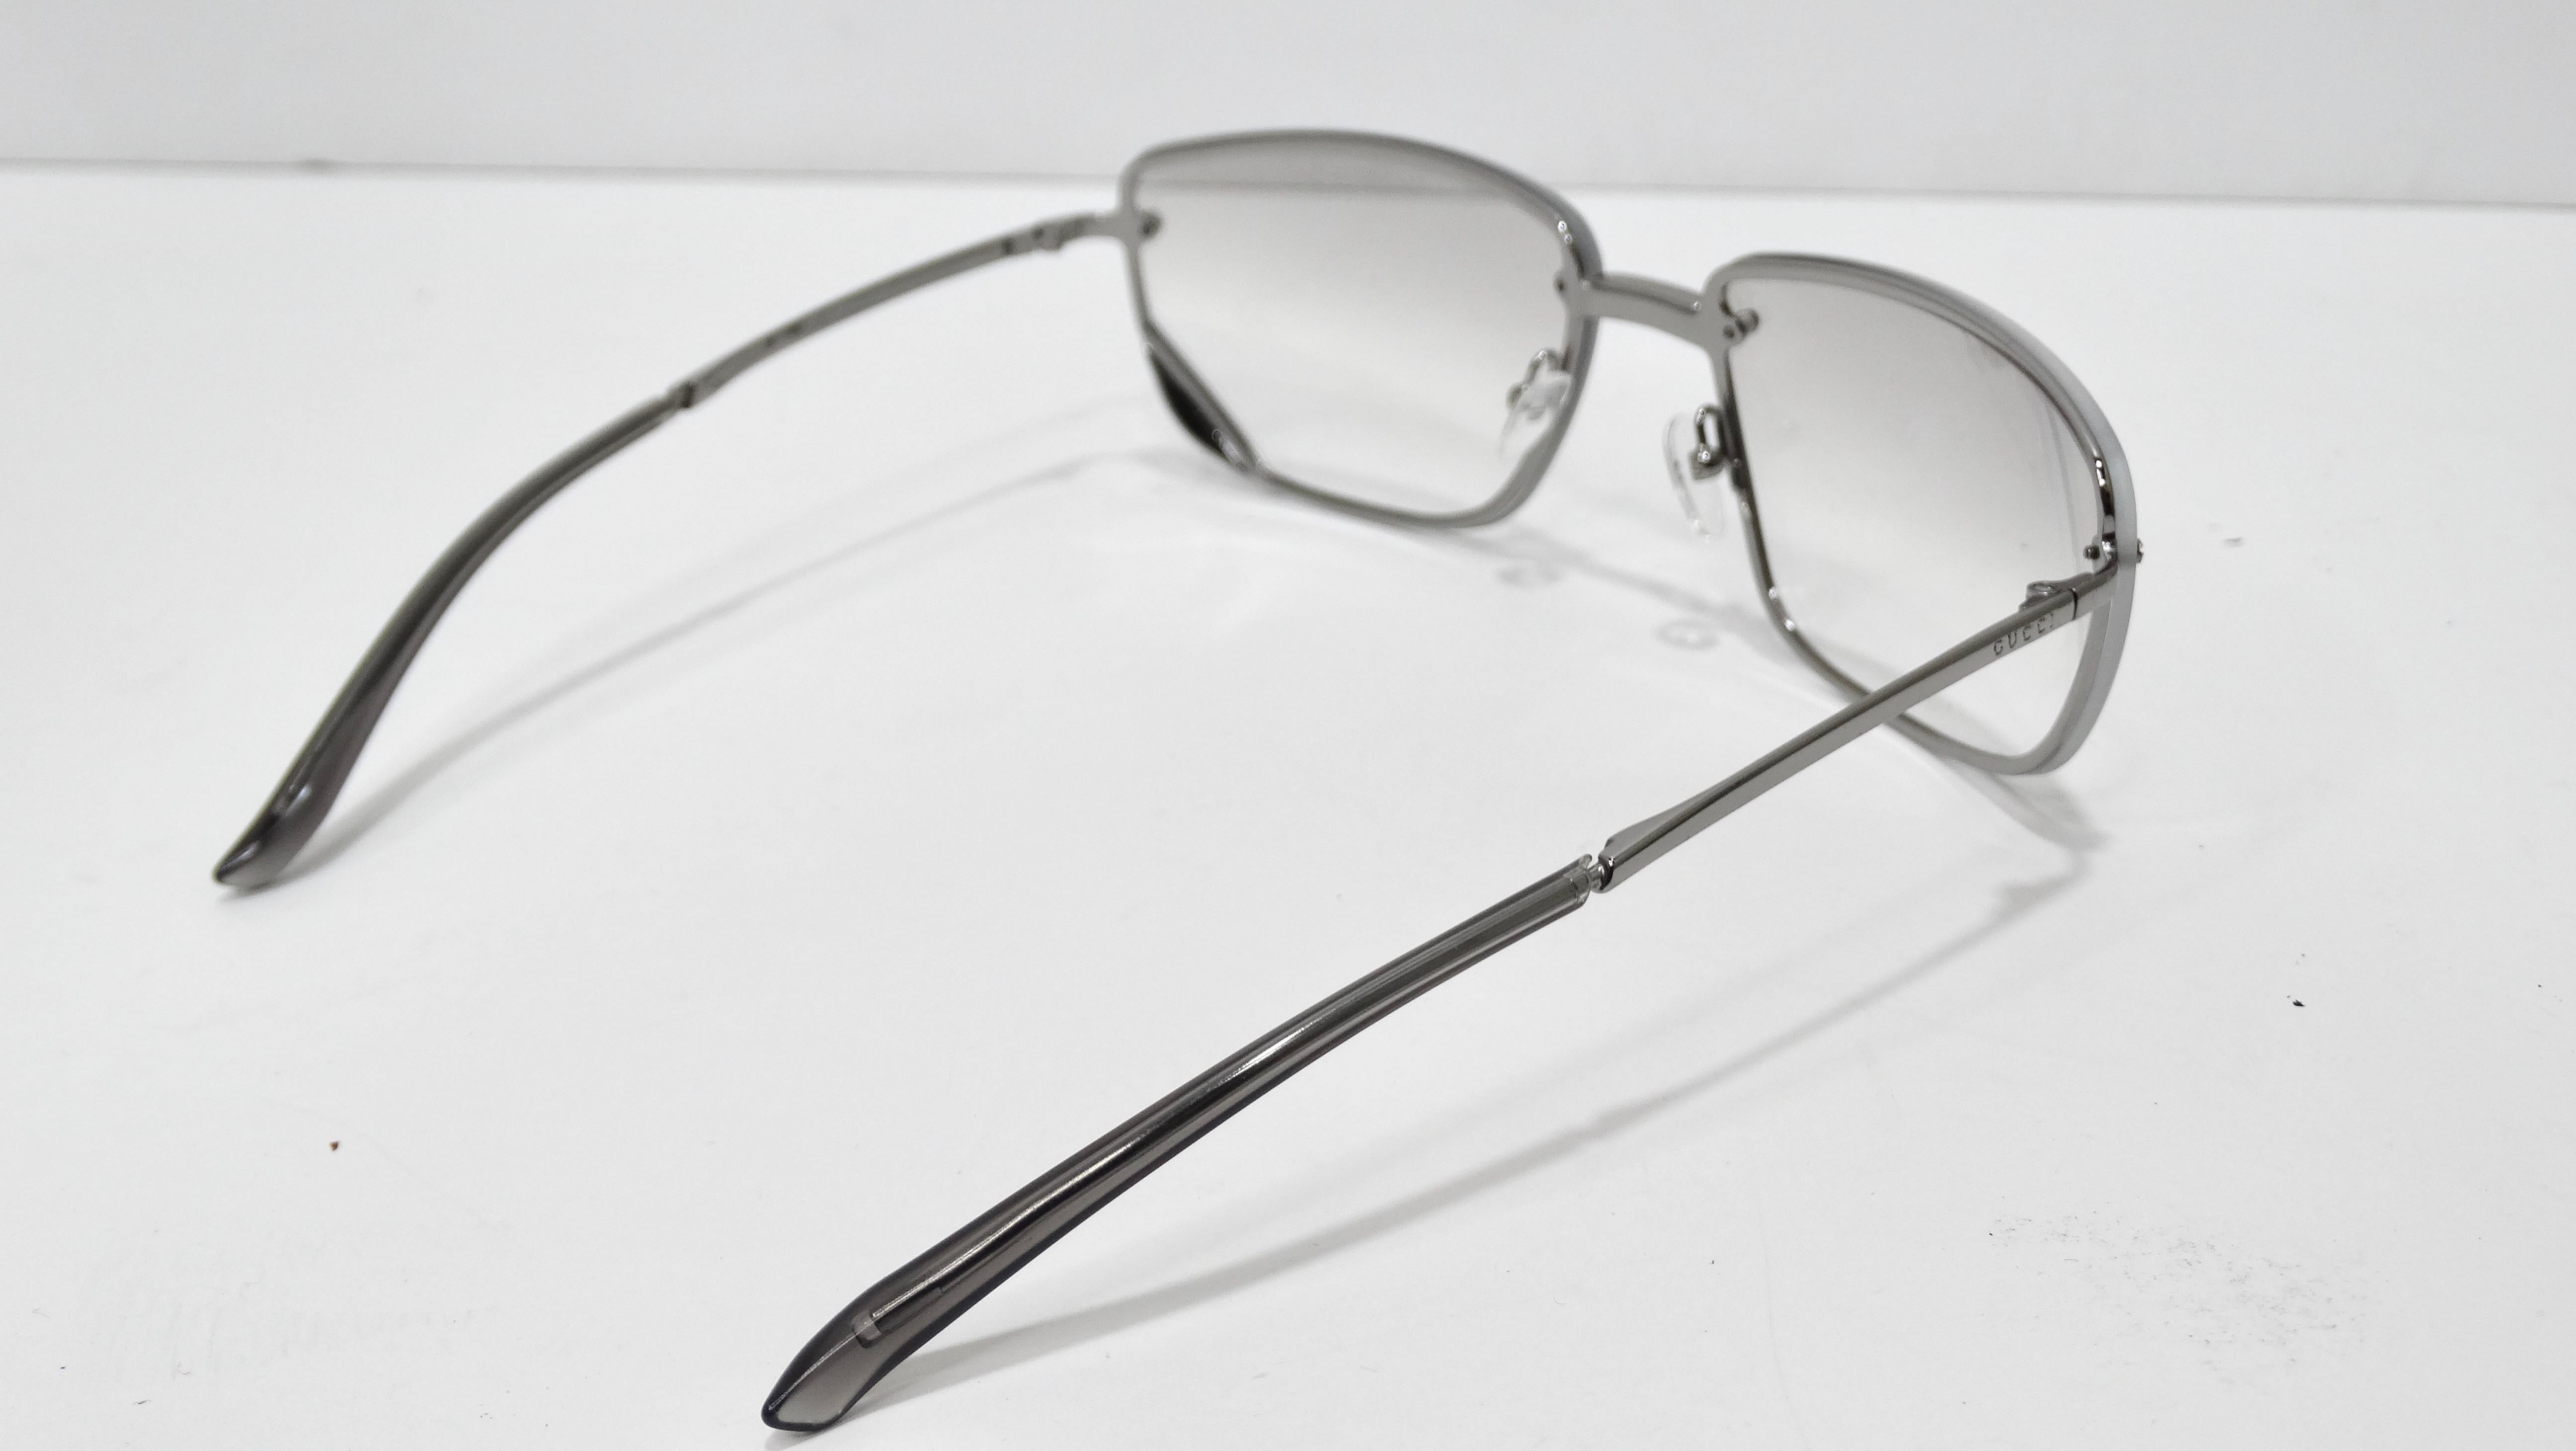 Gucci Vintage 1990's Metal-Framed Square Sunglasses In Excellent Condition For Sale In Scottsdale, AZ